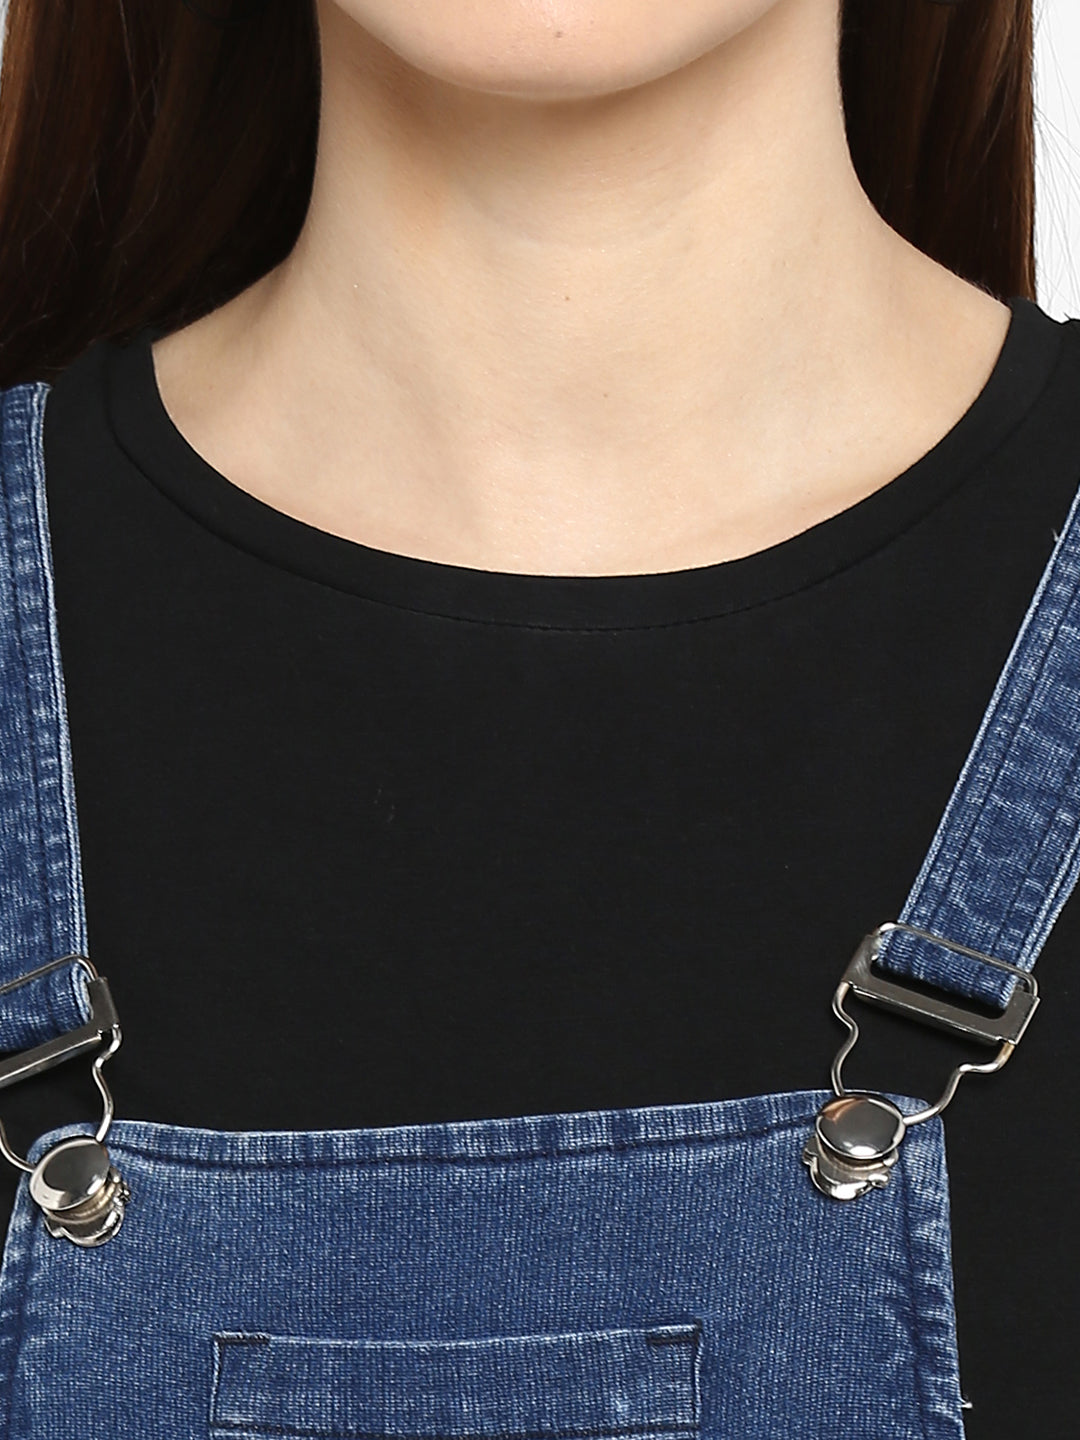 Women's Stretchable Denim Washed effect Dungarees(inner not provided)